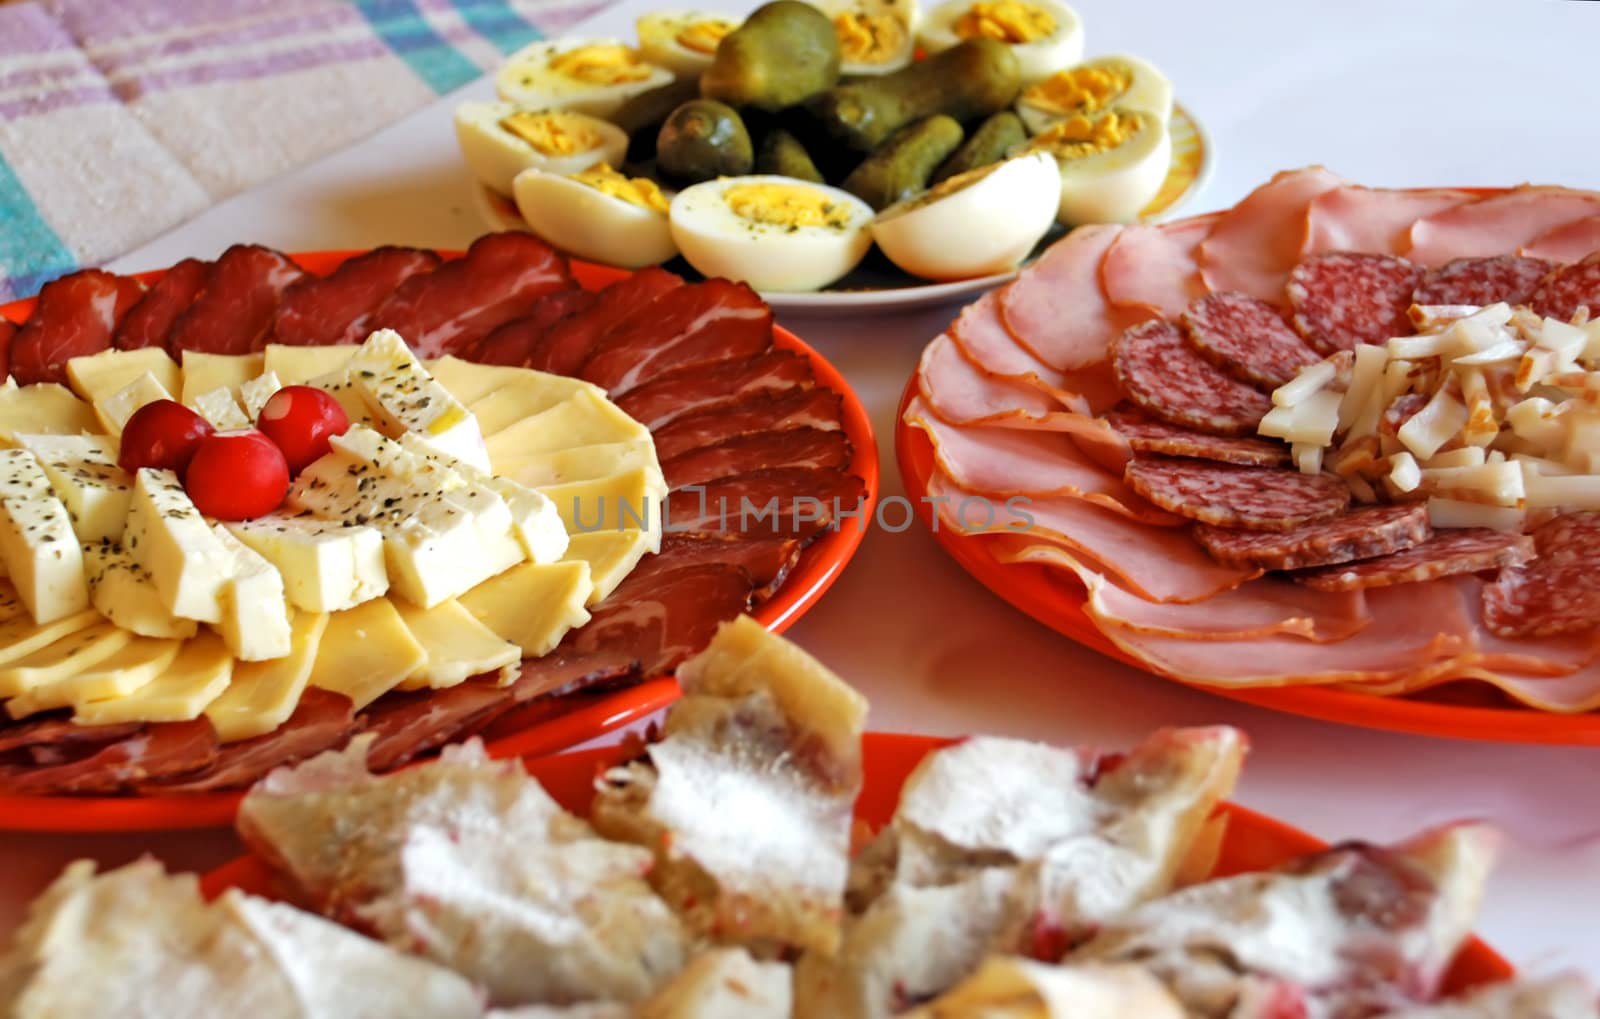 Appetizing meat dishes by simply